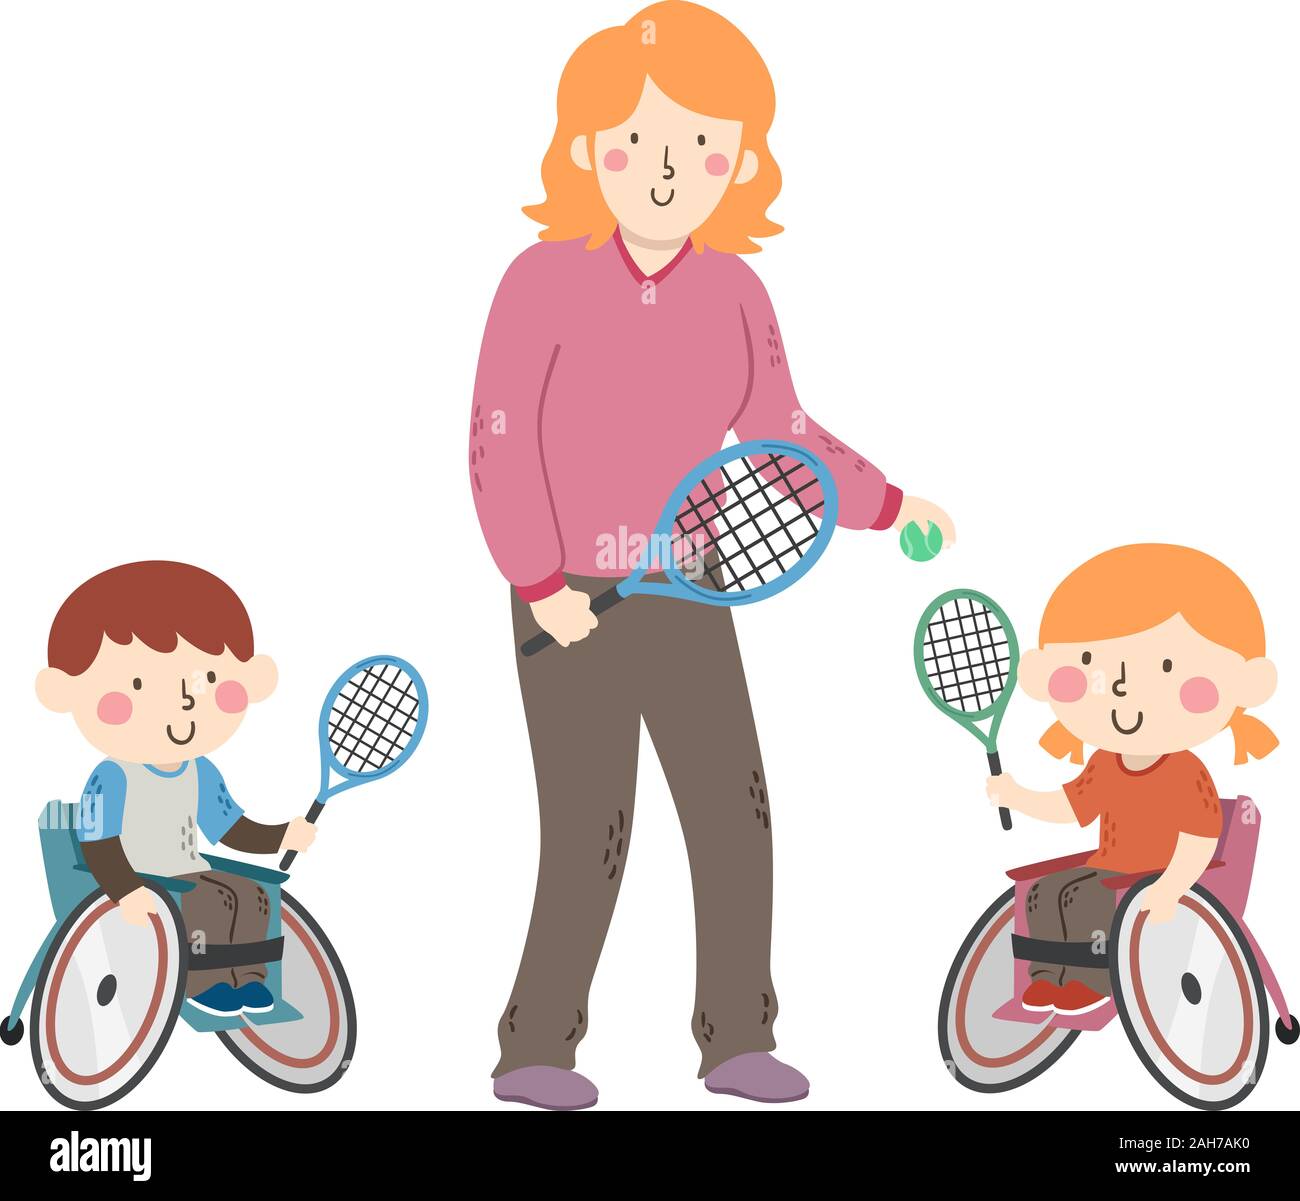 Illustration of Kids in Wheelchair Playing Tennis with Coach Stock Photo